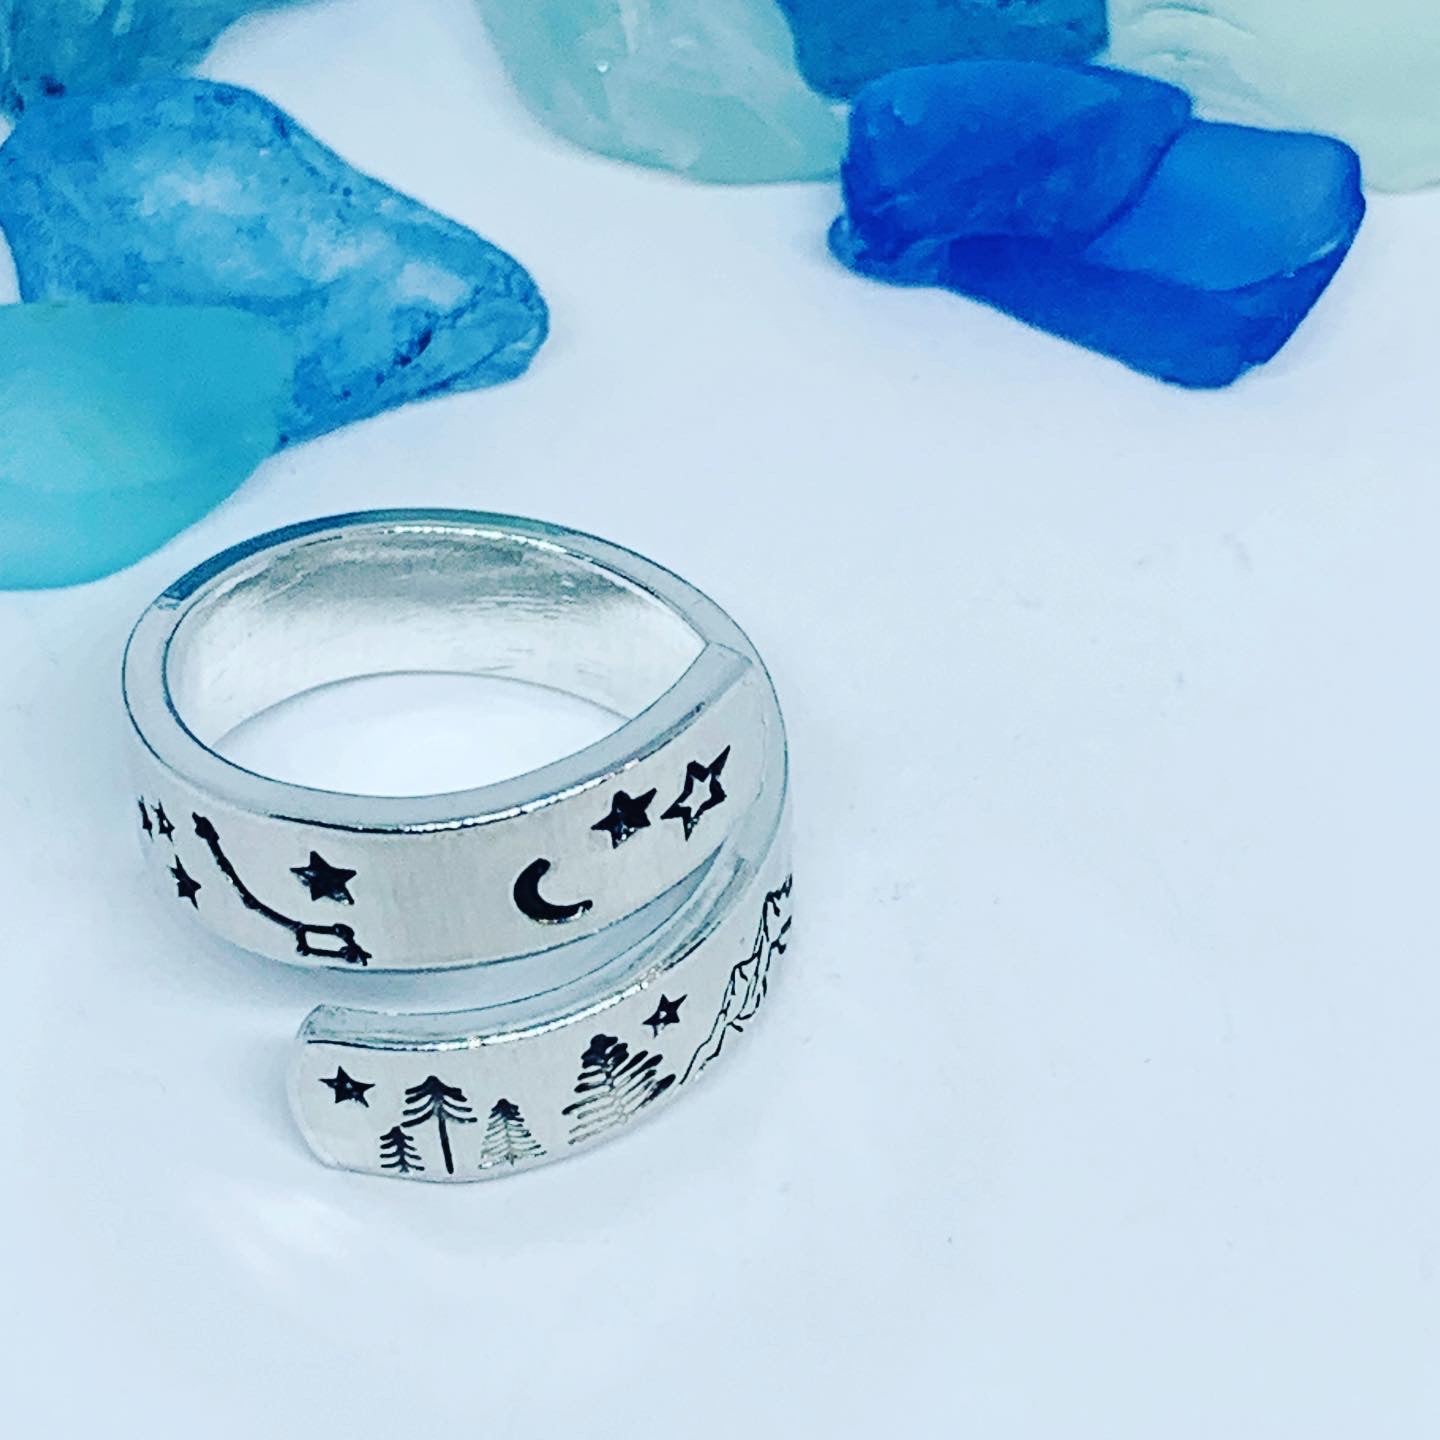 Wander More Hand Stamped Wrap Ring | Nature Lover | Outdoorsy Hiker | Gift for Her | Mountain Wrap Ring | Valentine’s Gift | Trees Mountains